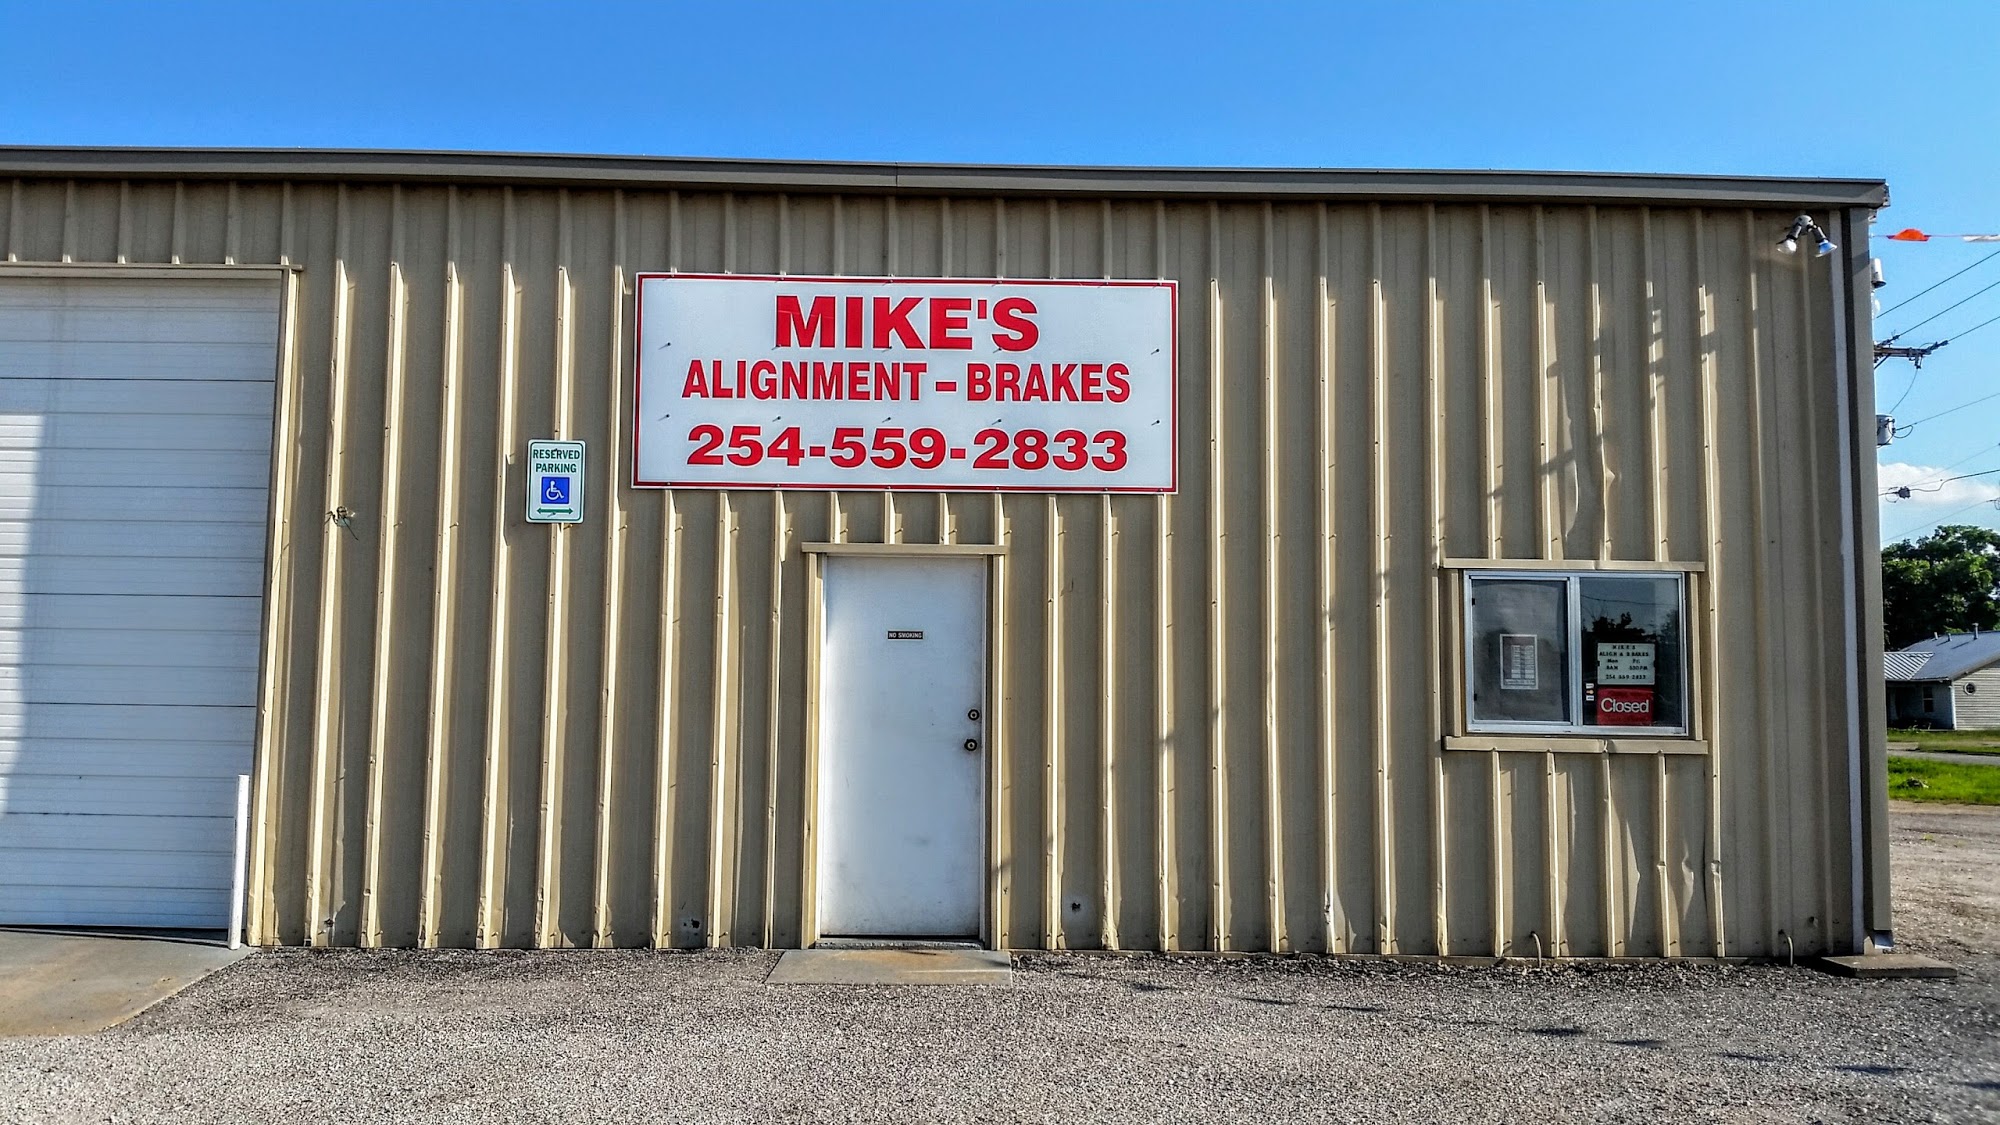 Mike's Alignment & Brakes